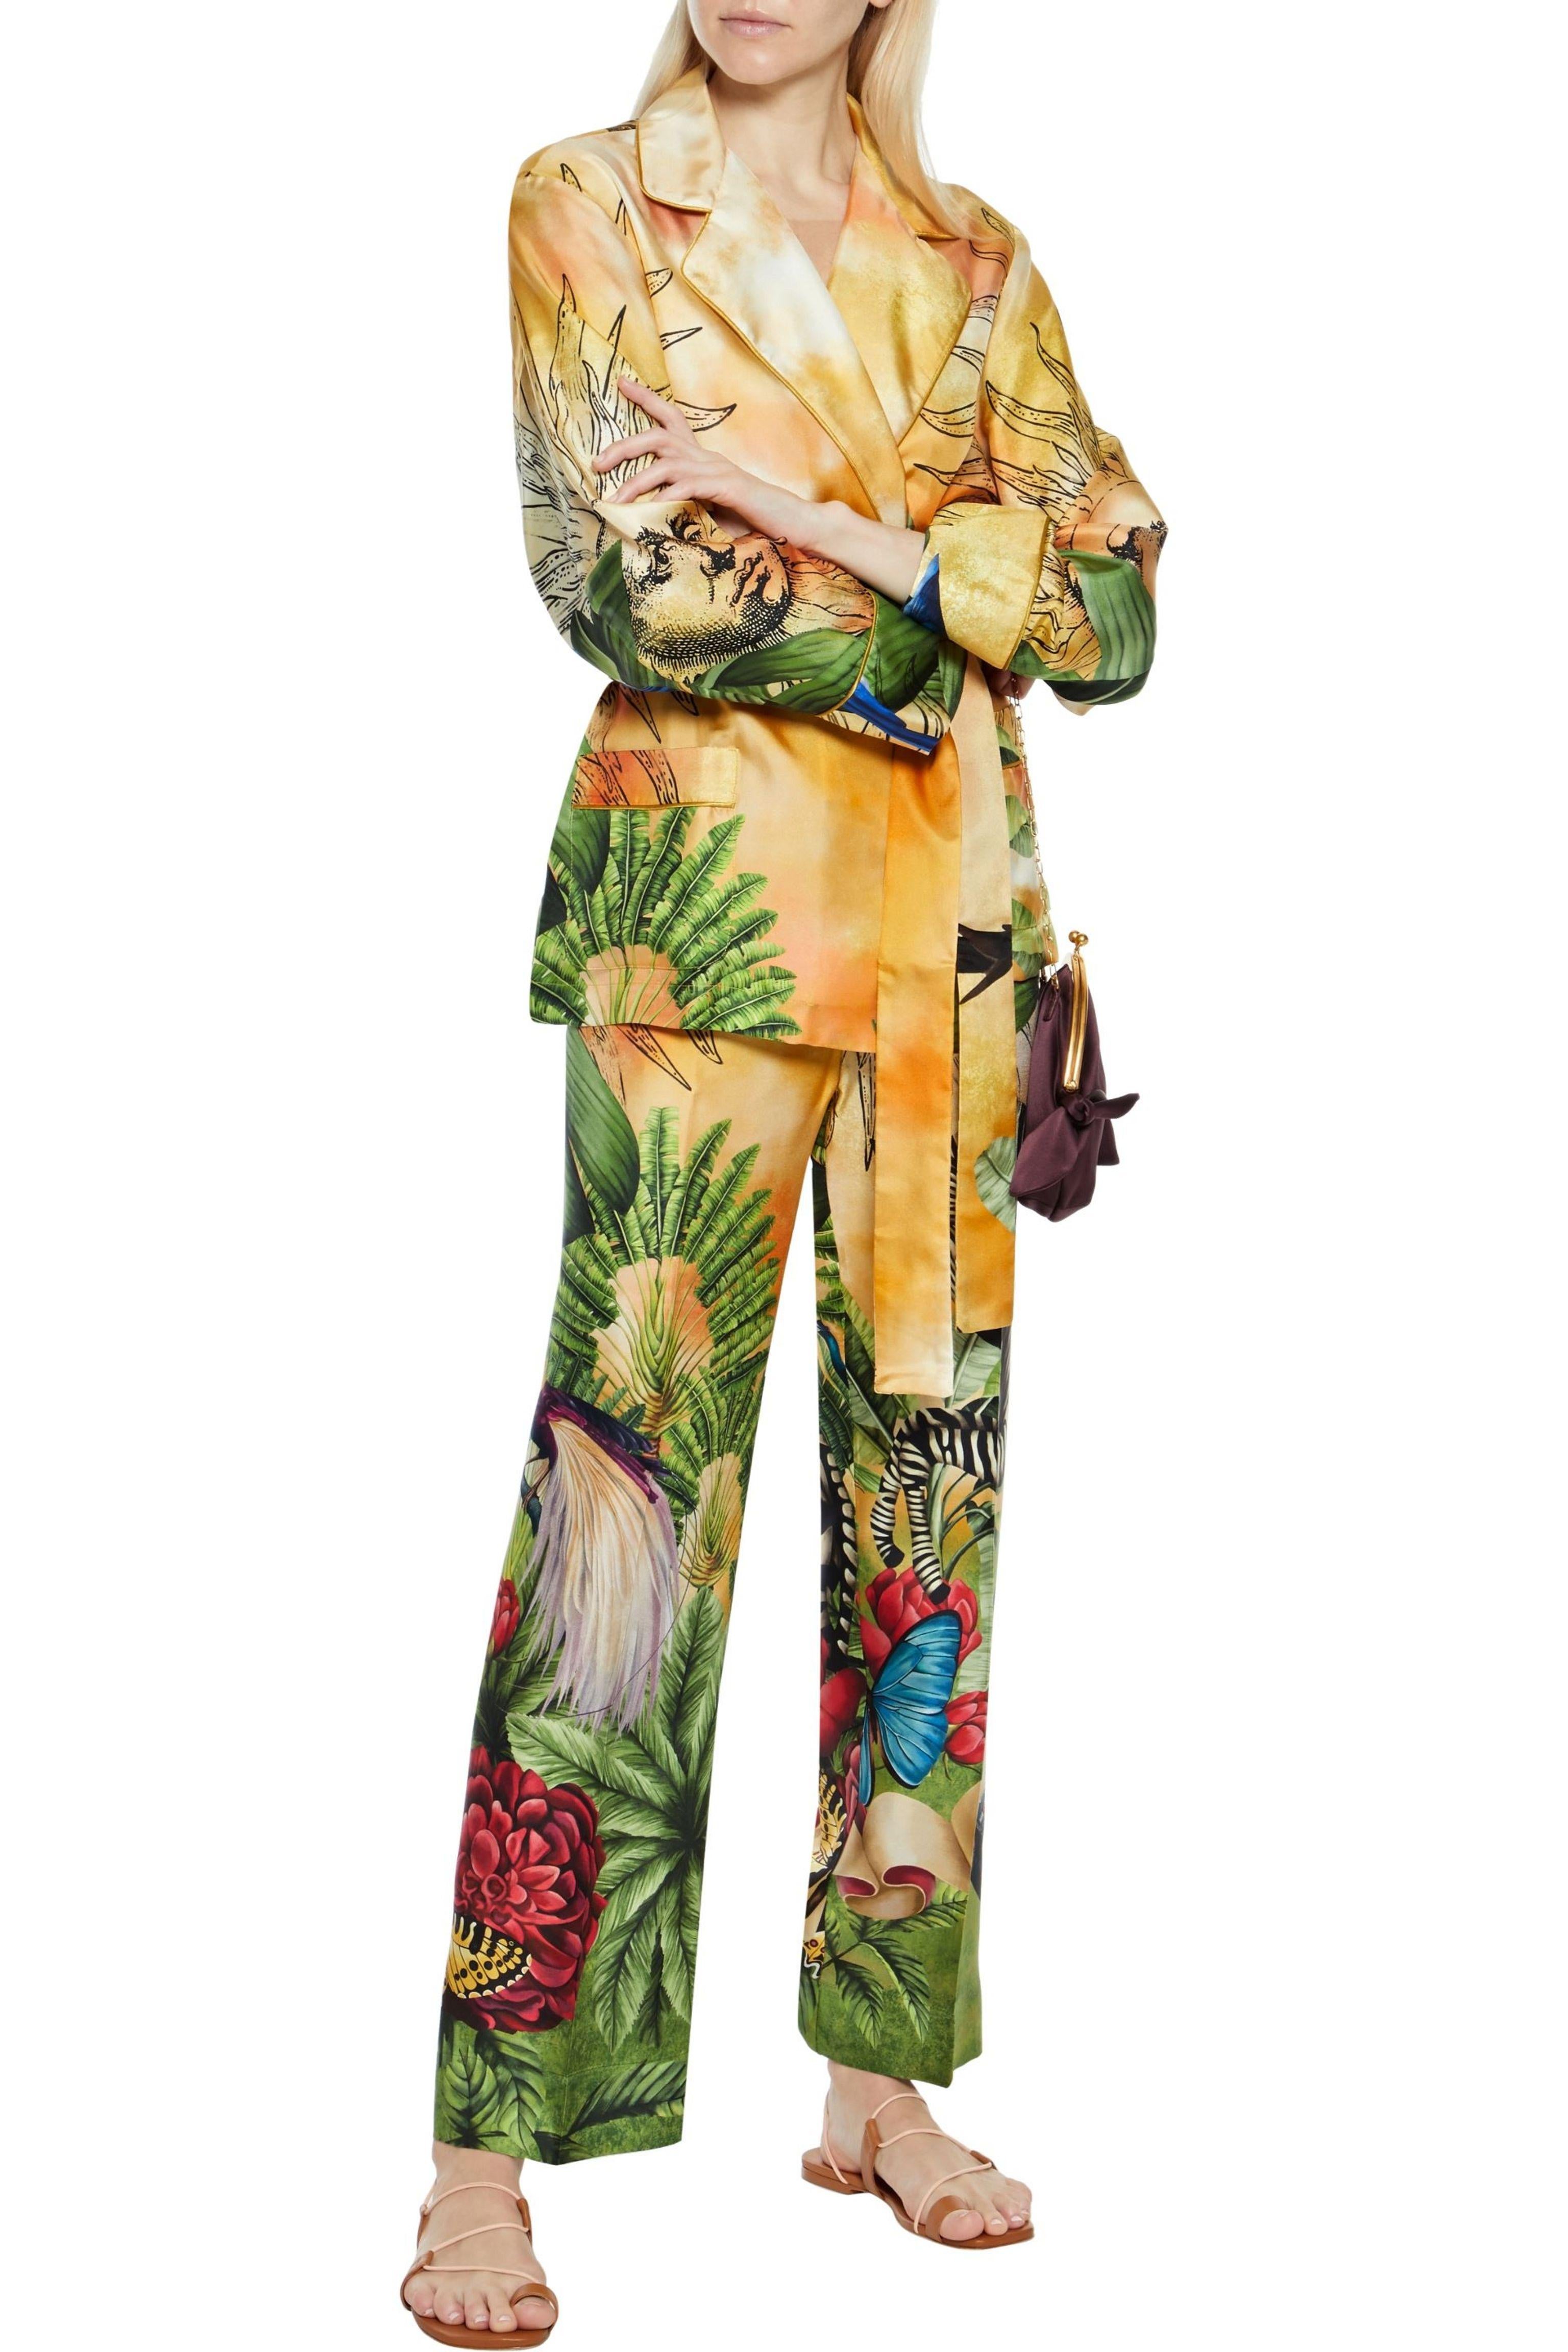 NEW F.R.S For Restless Sleepers FRS Jungle Animal Zebra Birds Pants Suit M For Sale 1